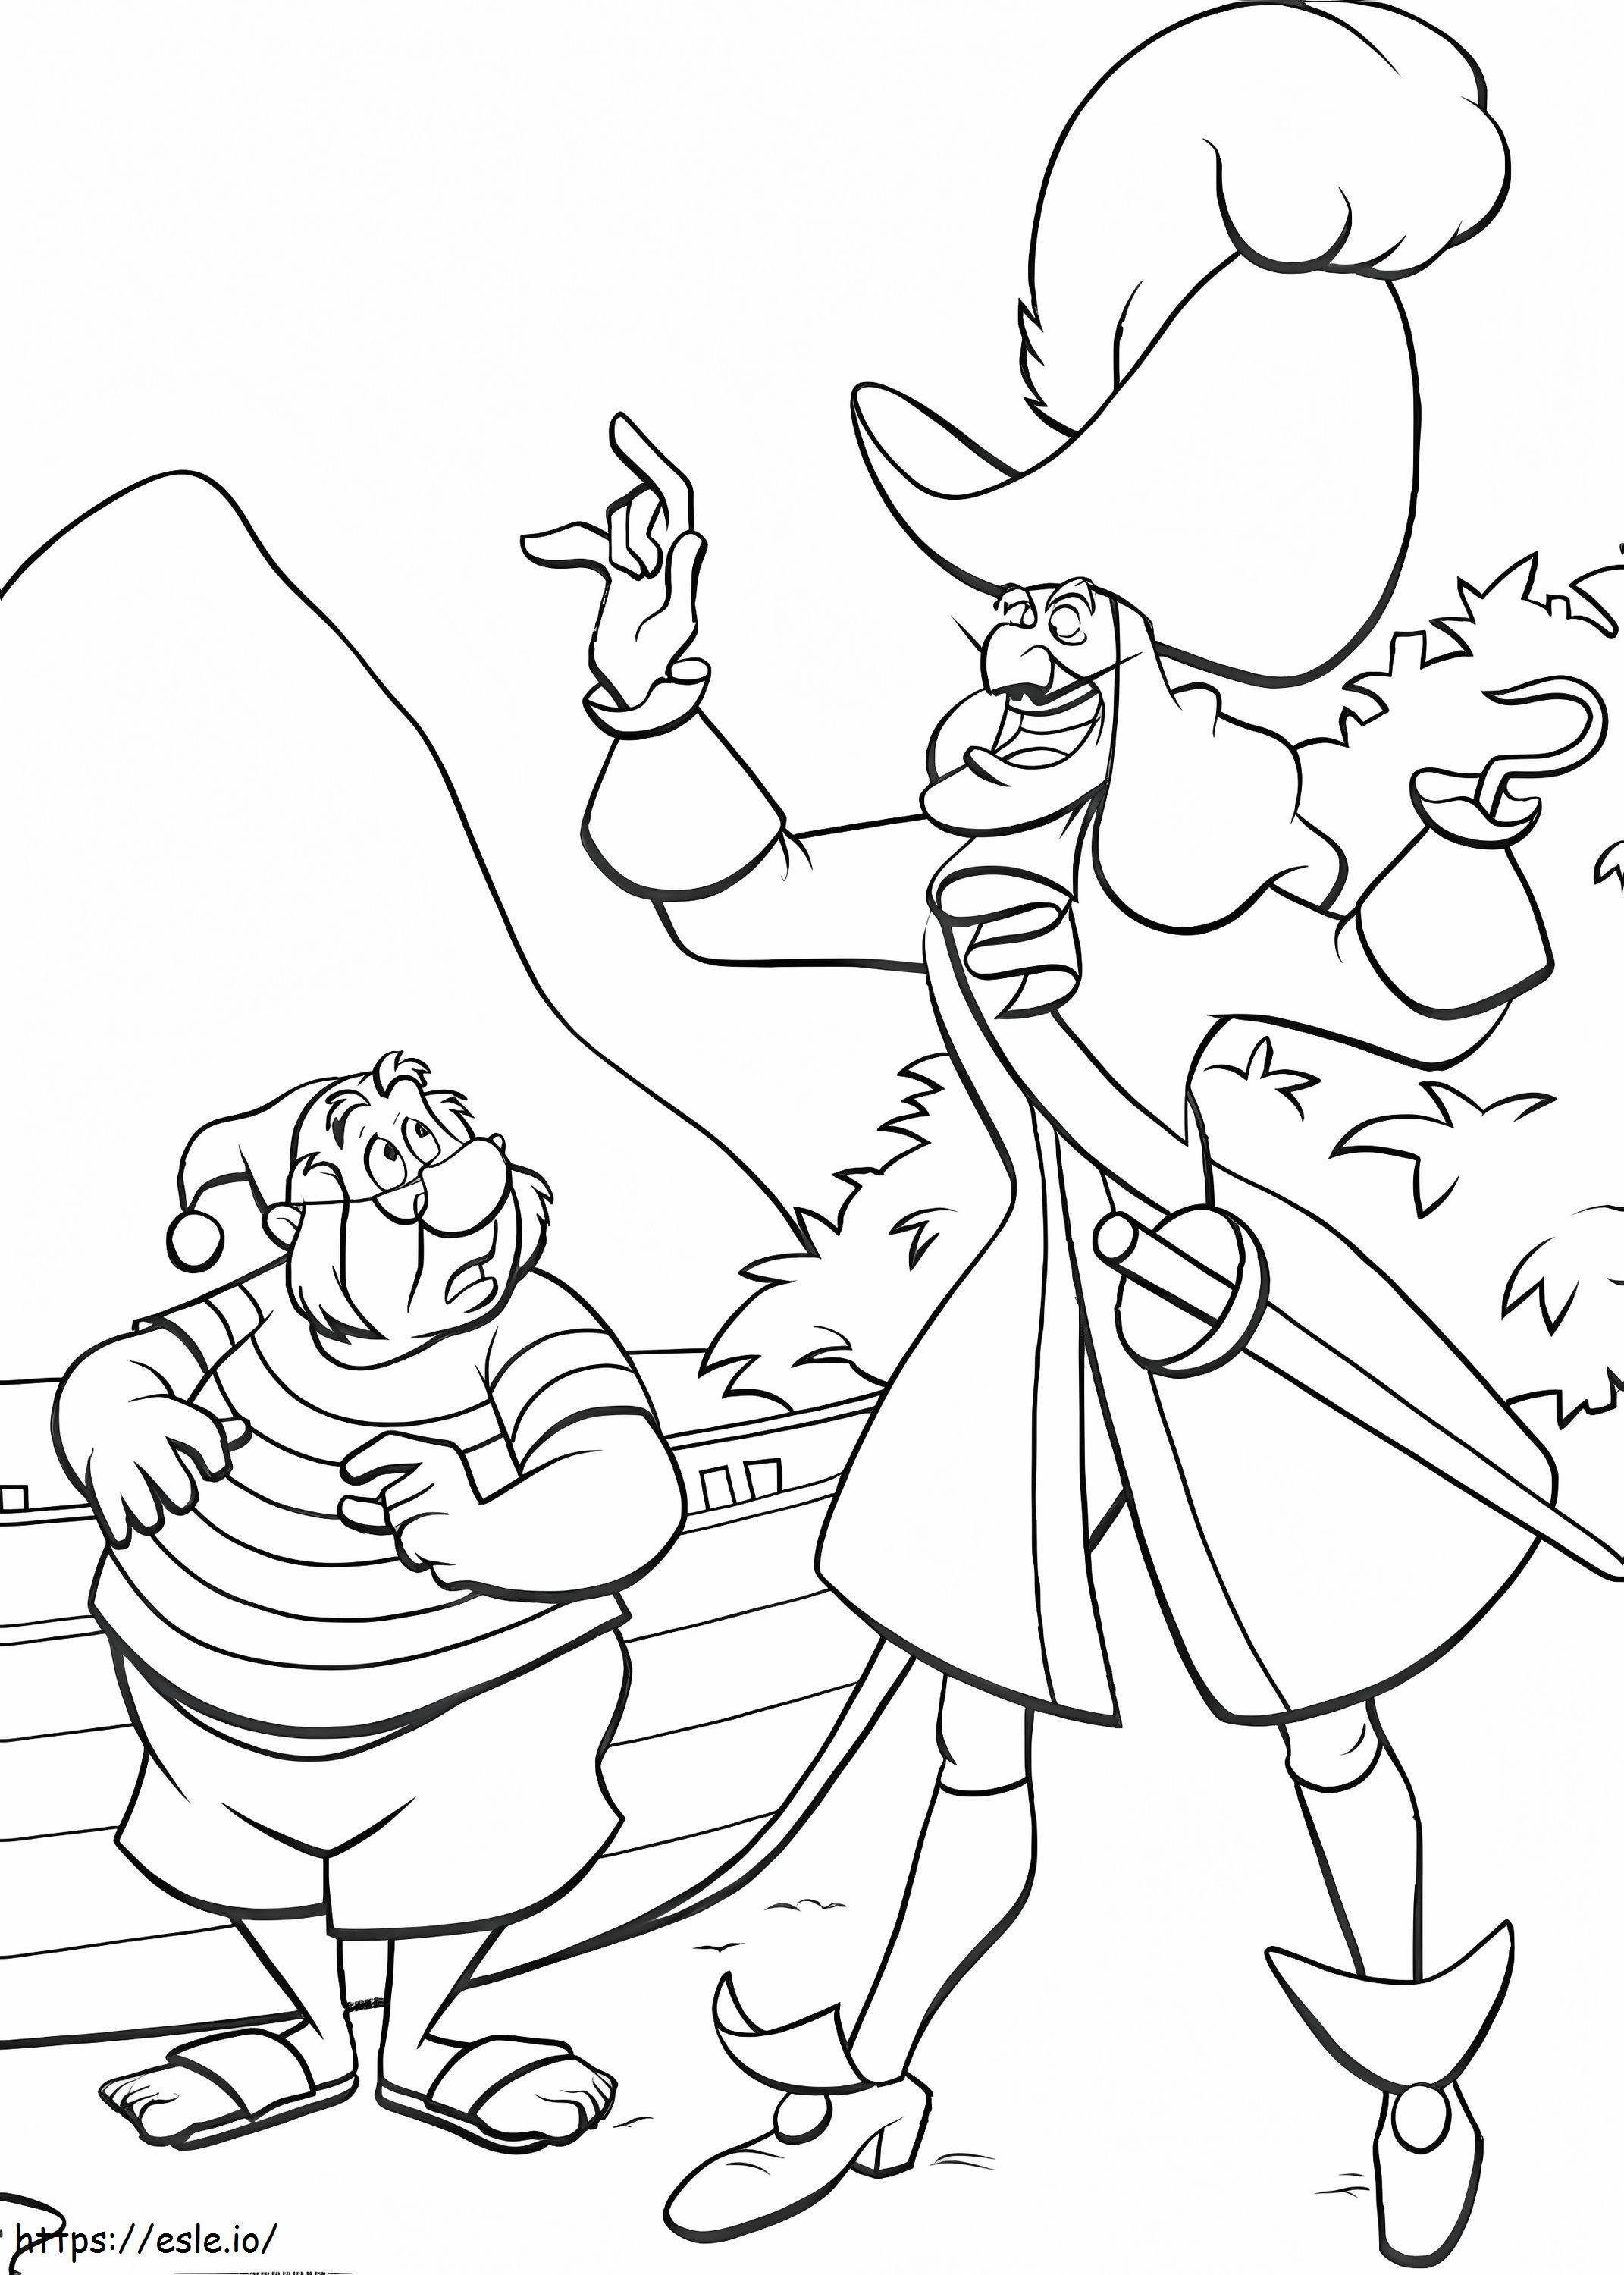 Captain Hook Talking To Smee coloring page